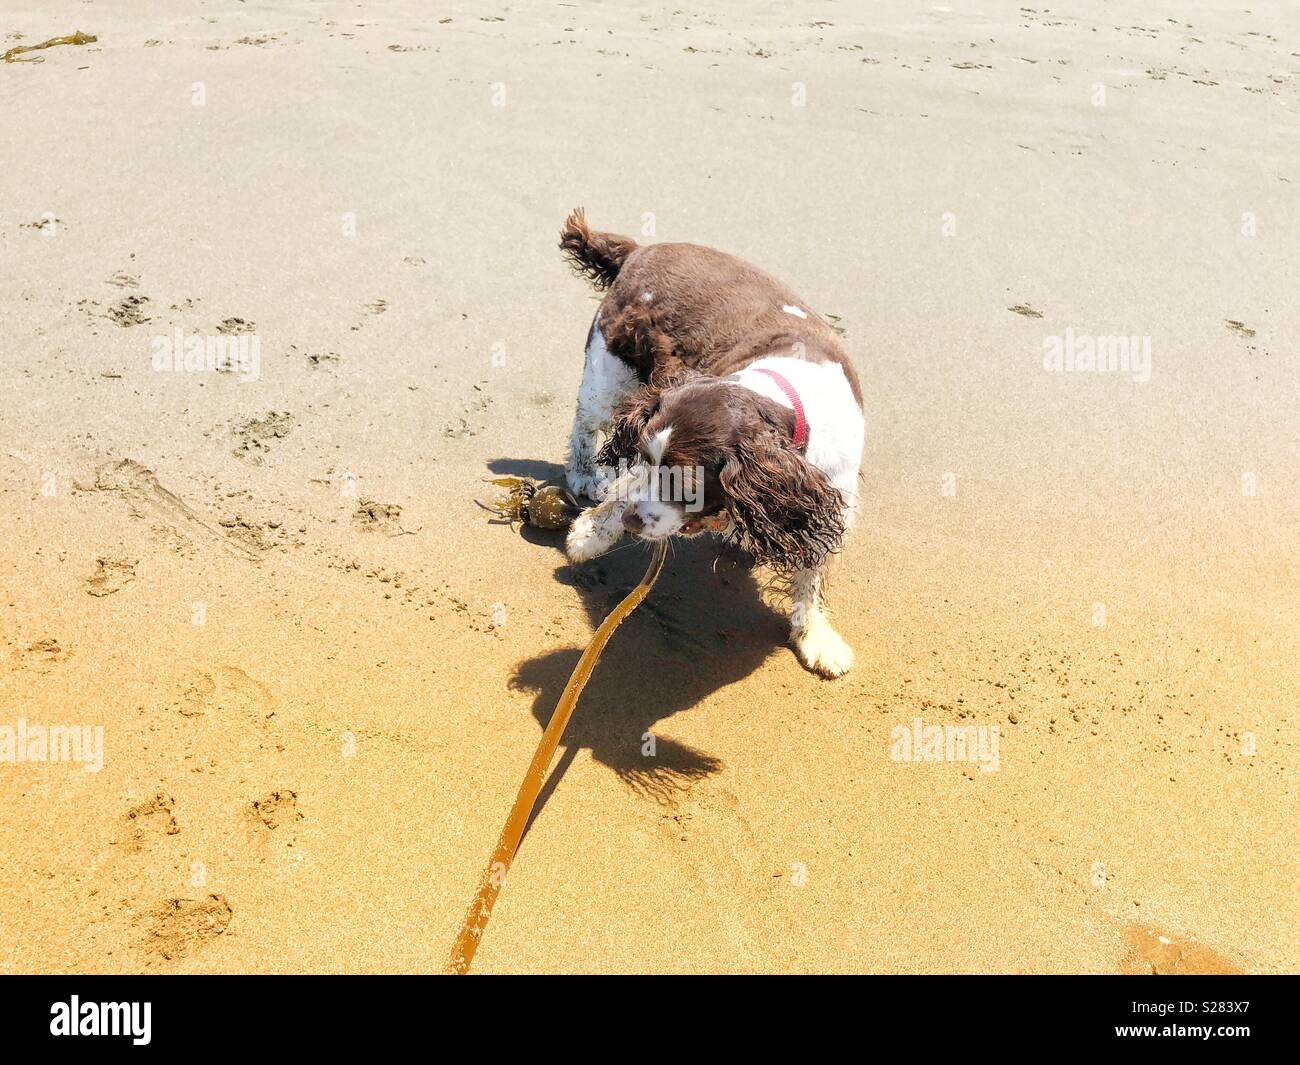 Floppy ears happy English Springer Spaniel puppy dog playing tug of war with a long vine of Pacific bull kelp at a golden sand beach in California under sunny skies Stock Photo